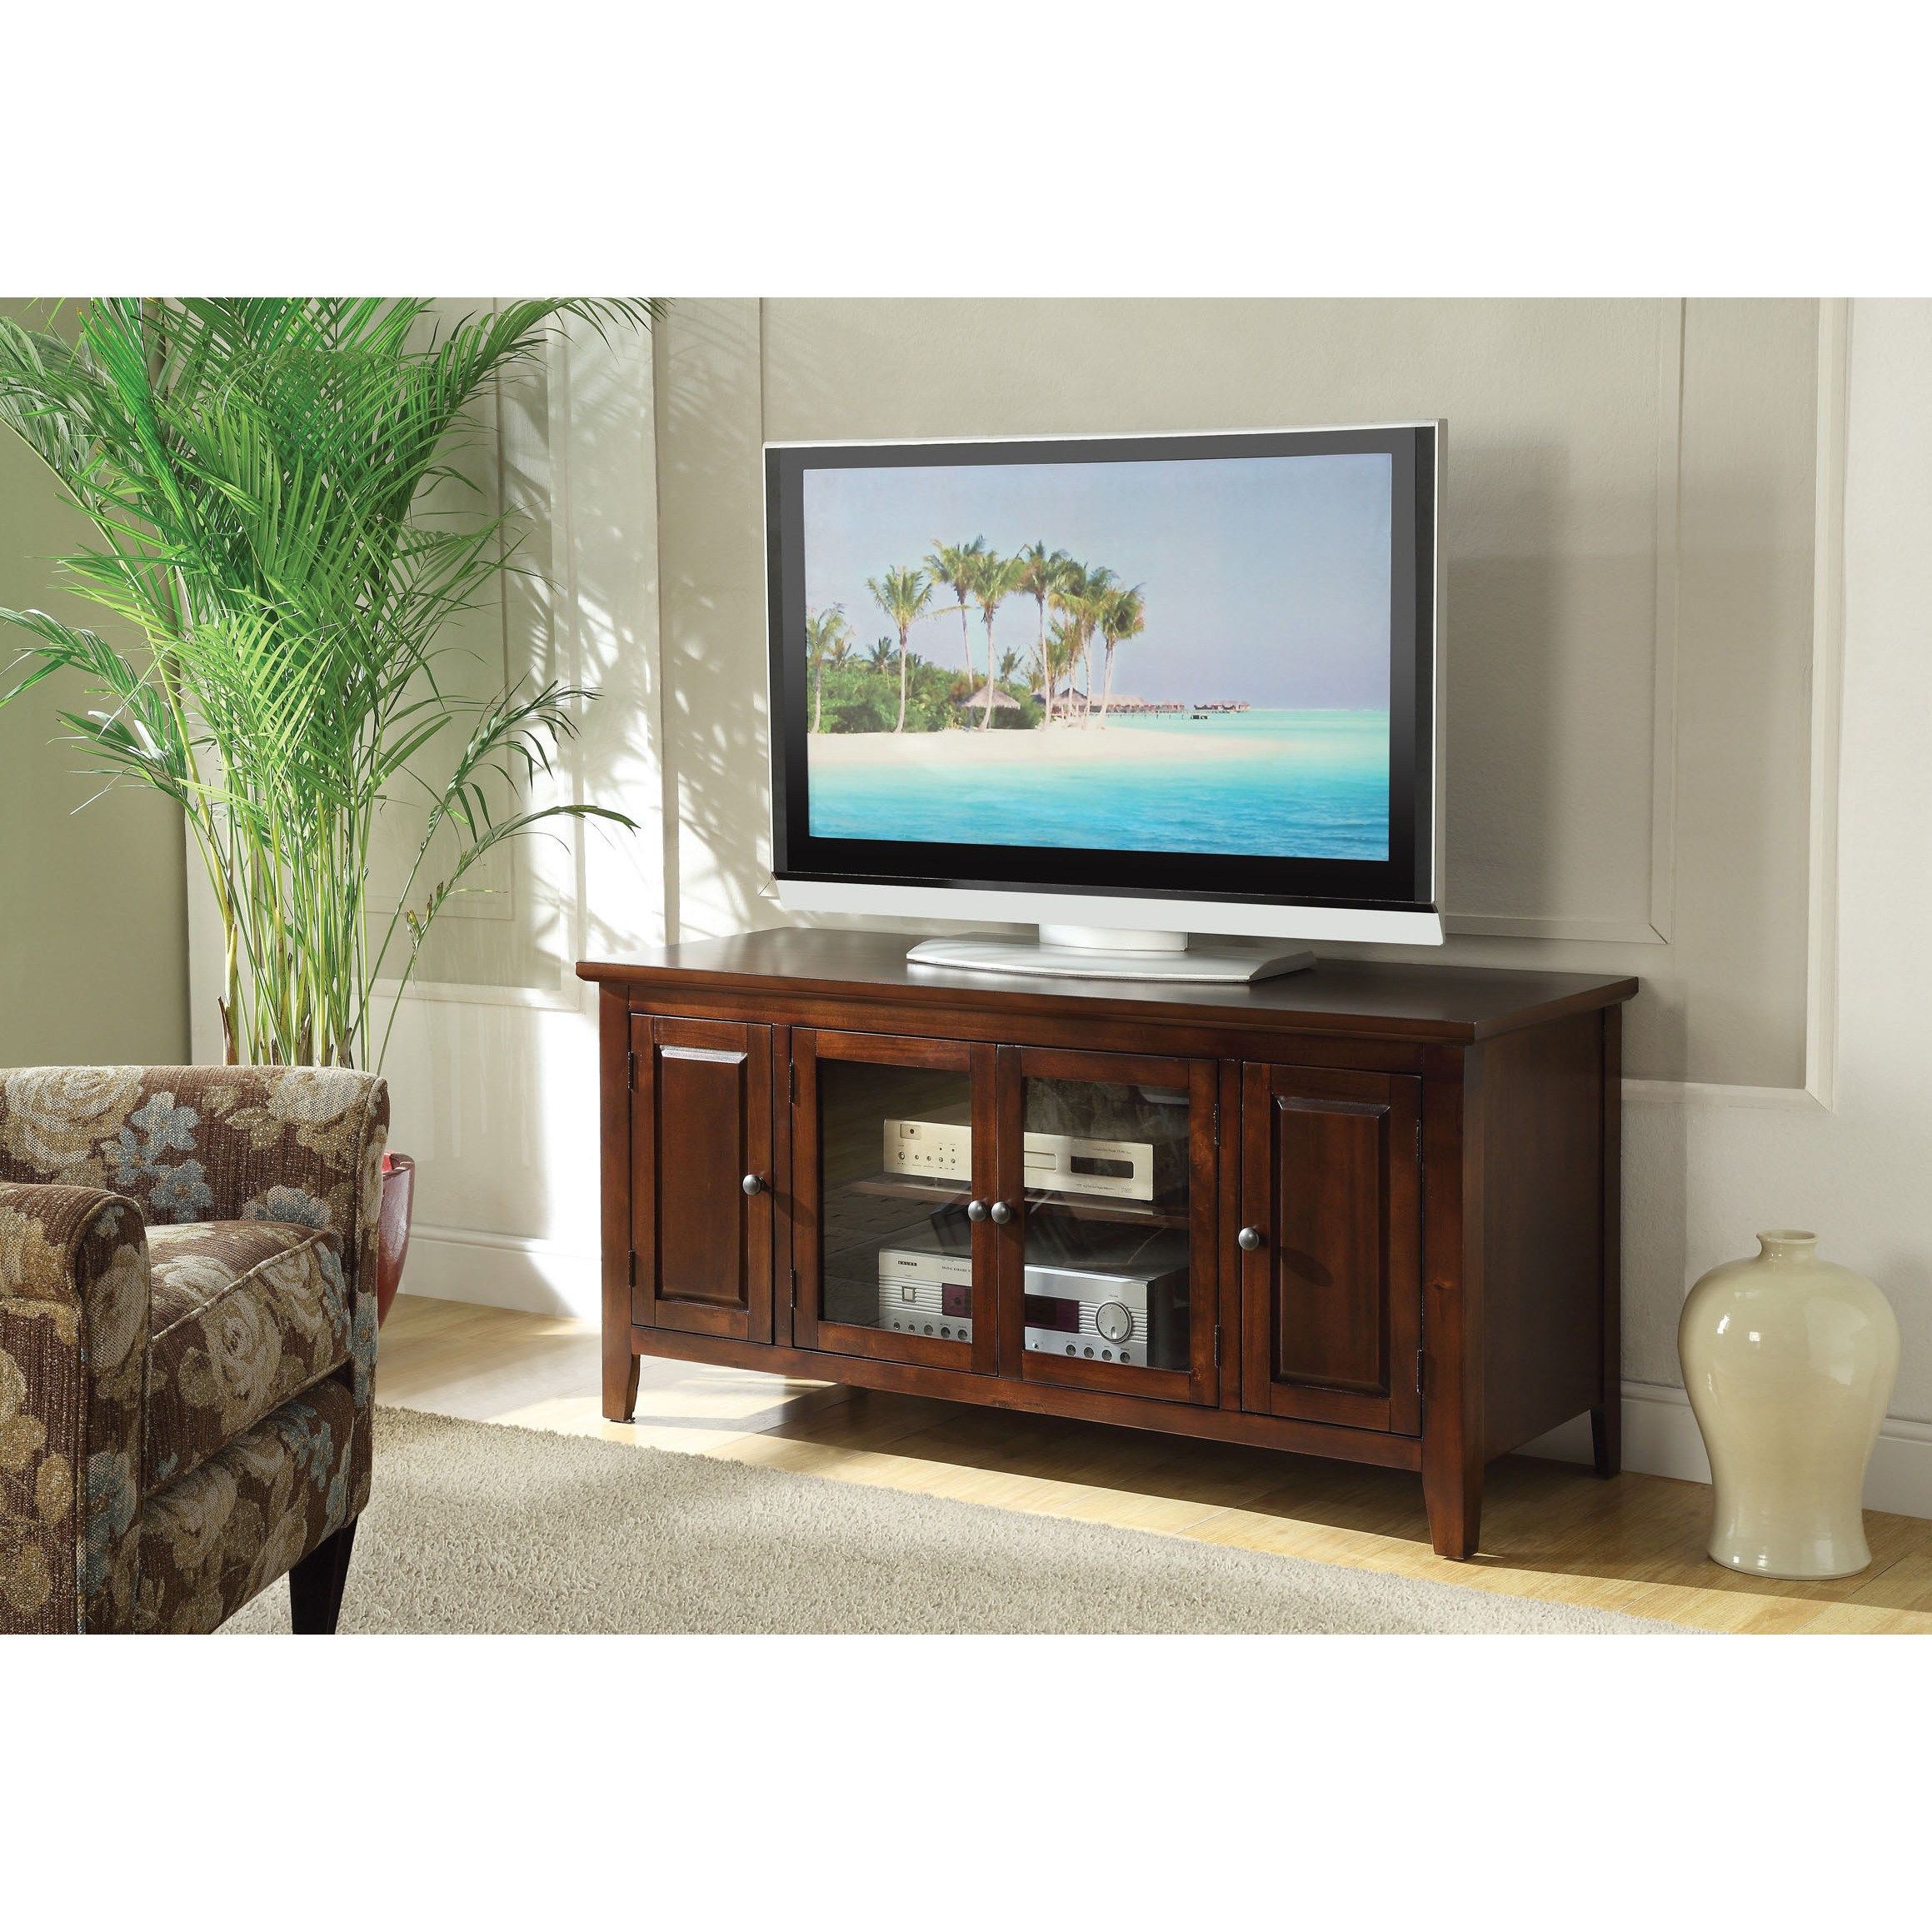 Acme Christella Tv Stand For Flat Screen Tvs Up To 60 With Avenir Tv Stands For Tvs Up To 60&quot; (View 5 of 15)